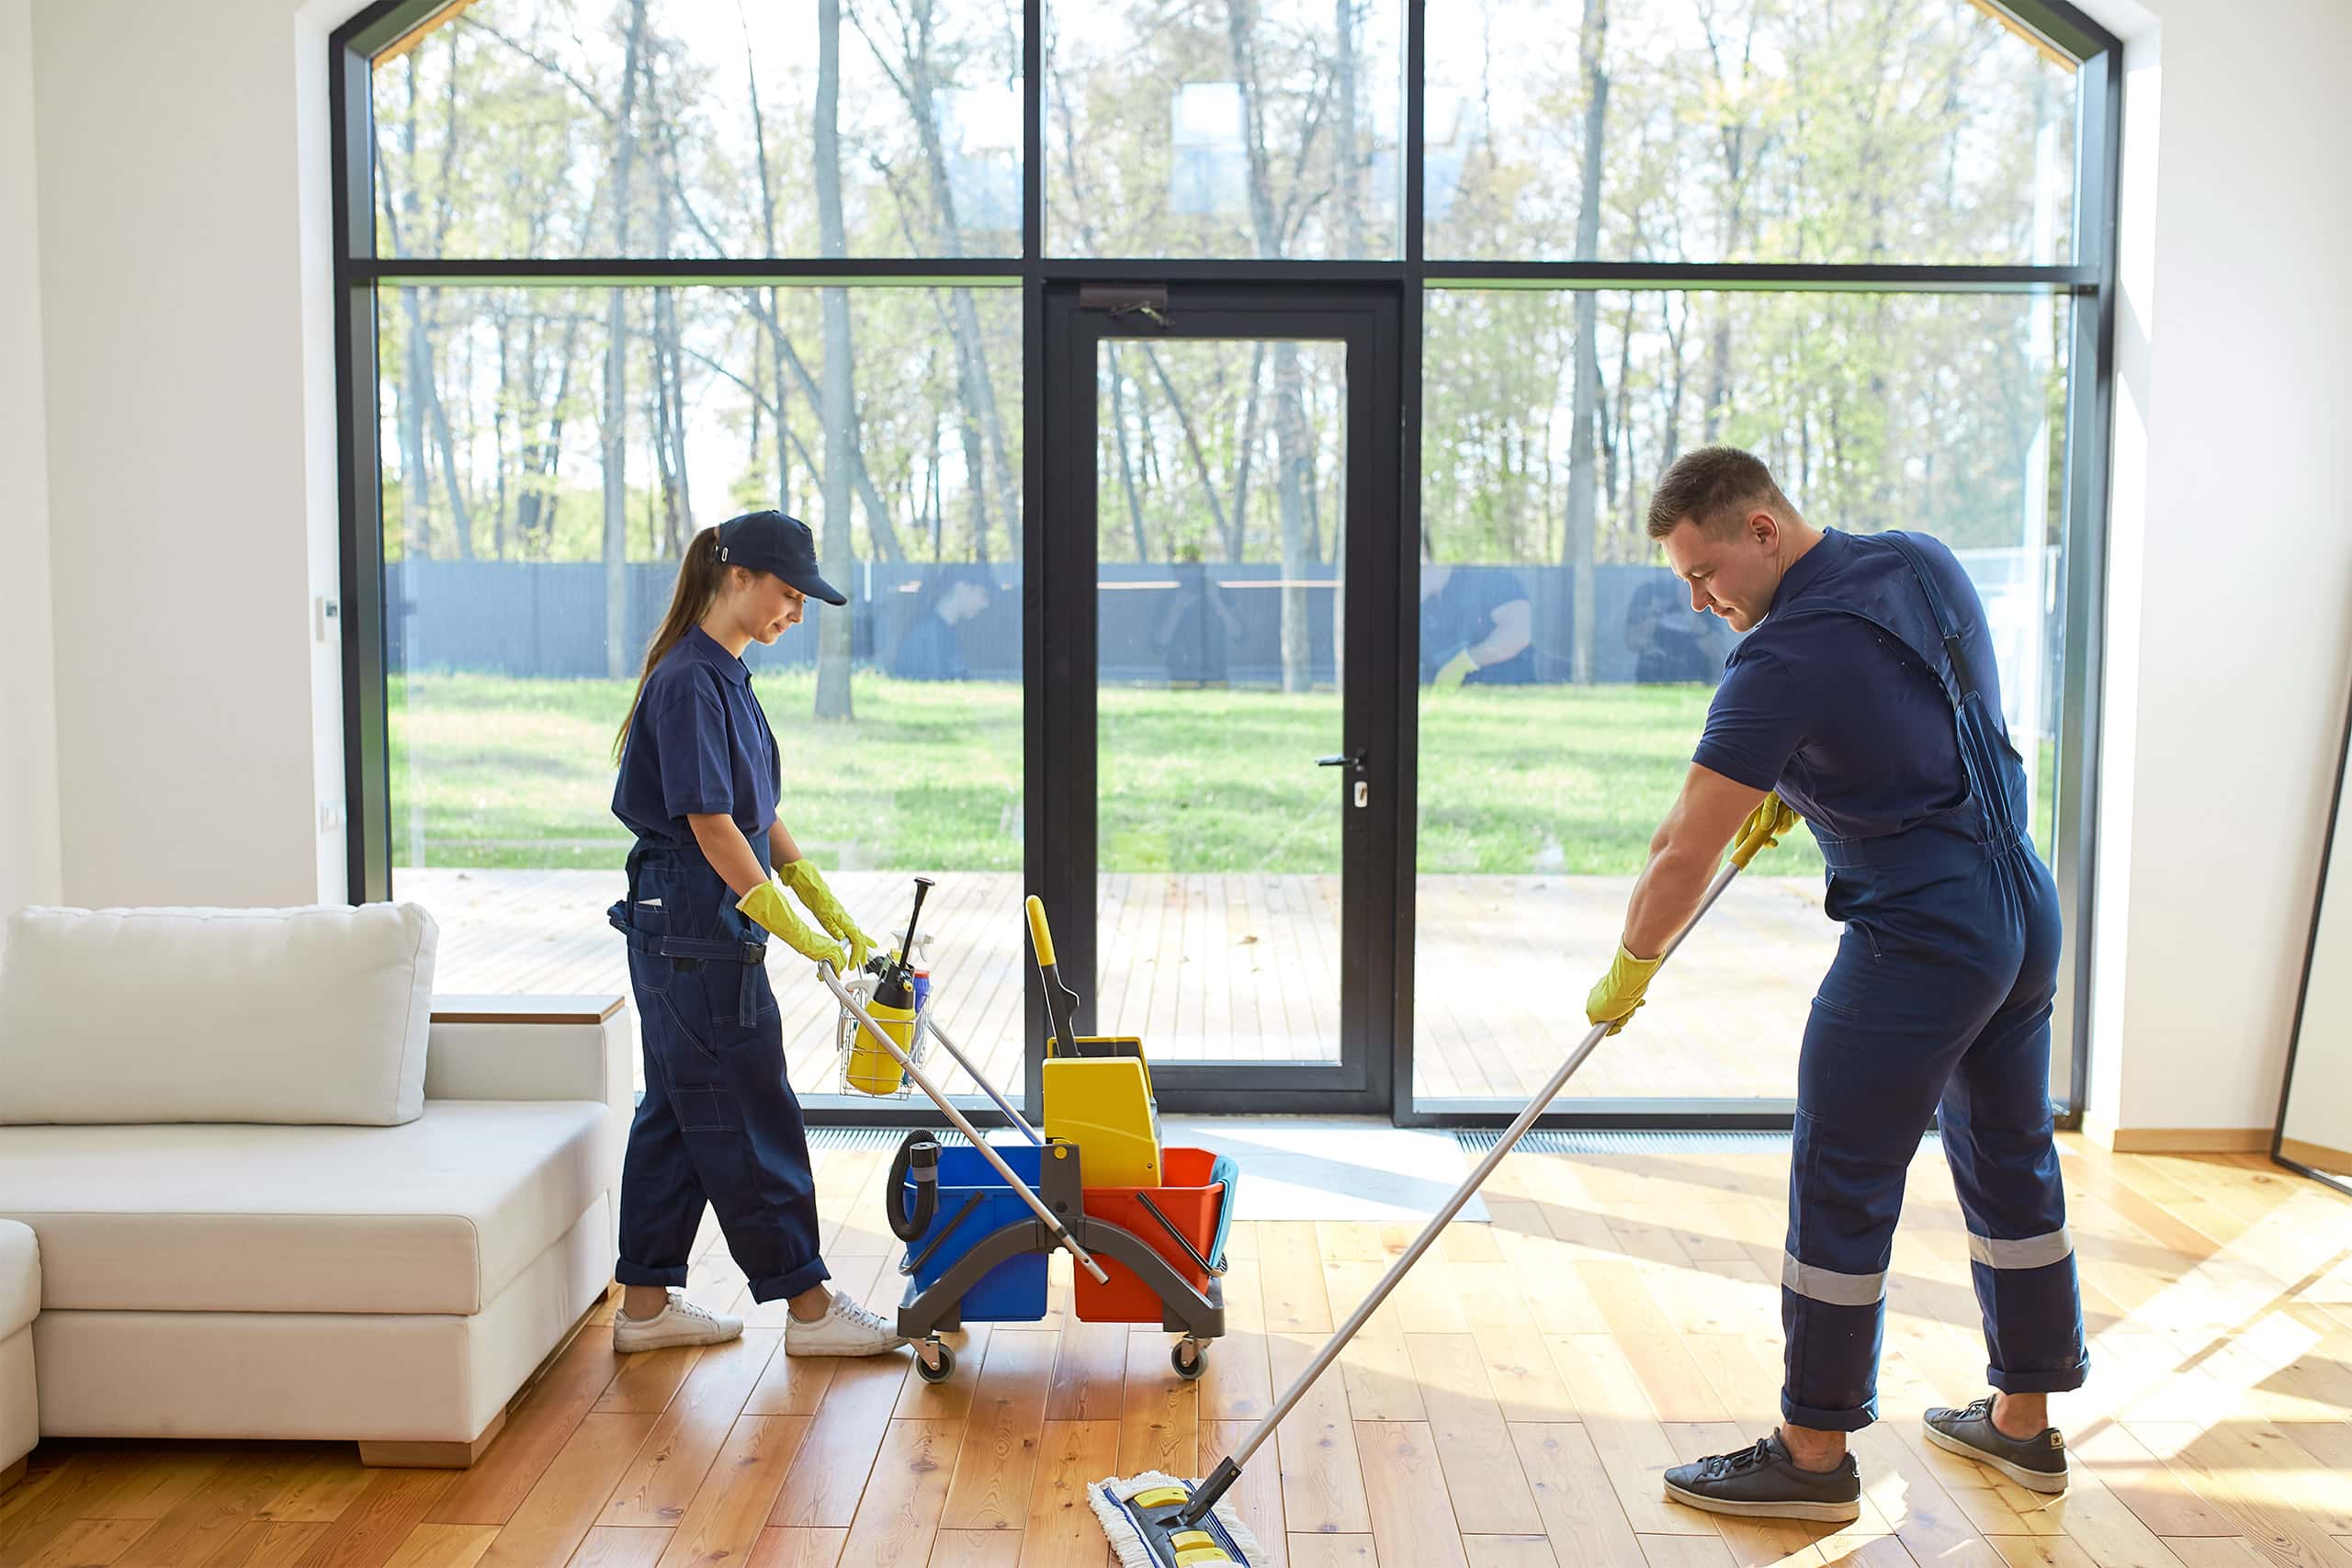 Why hire a janitorial service?